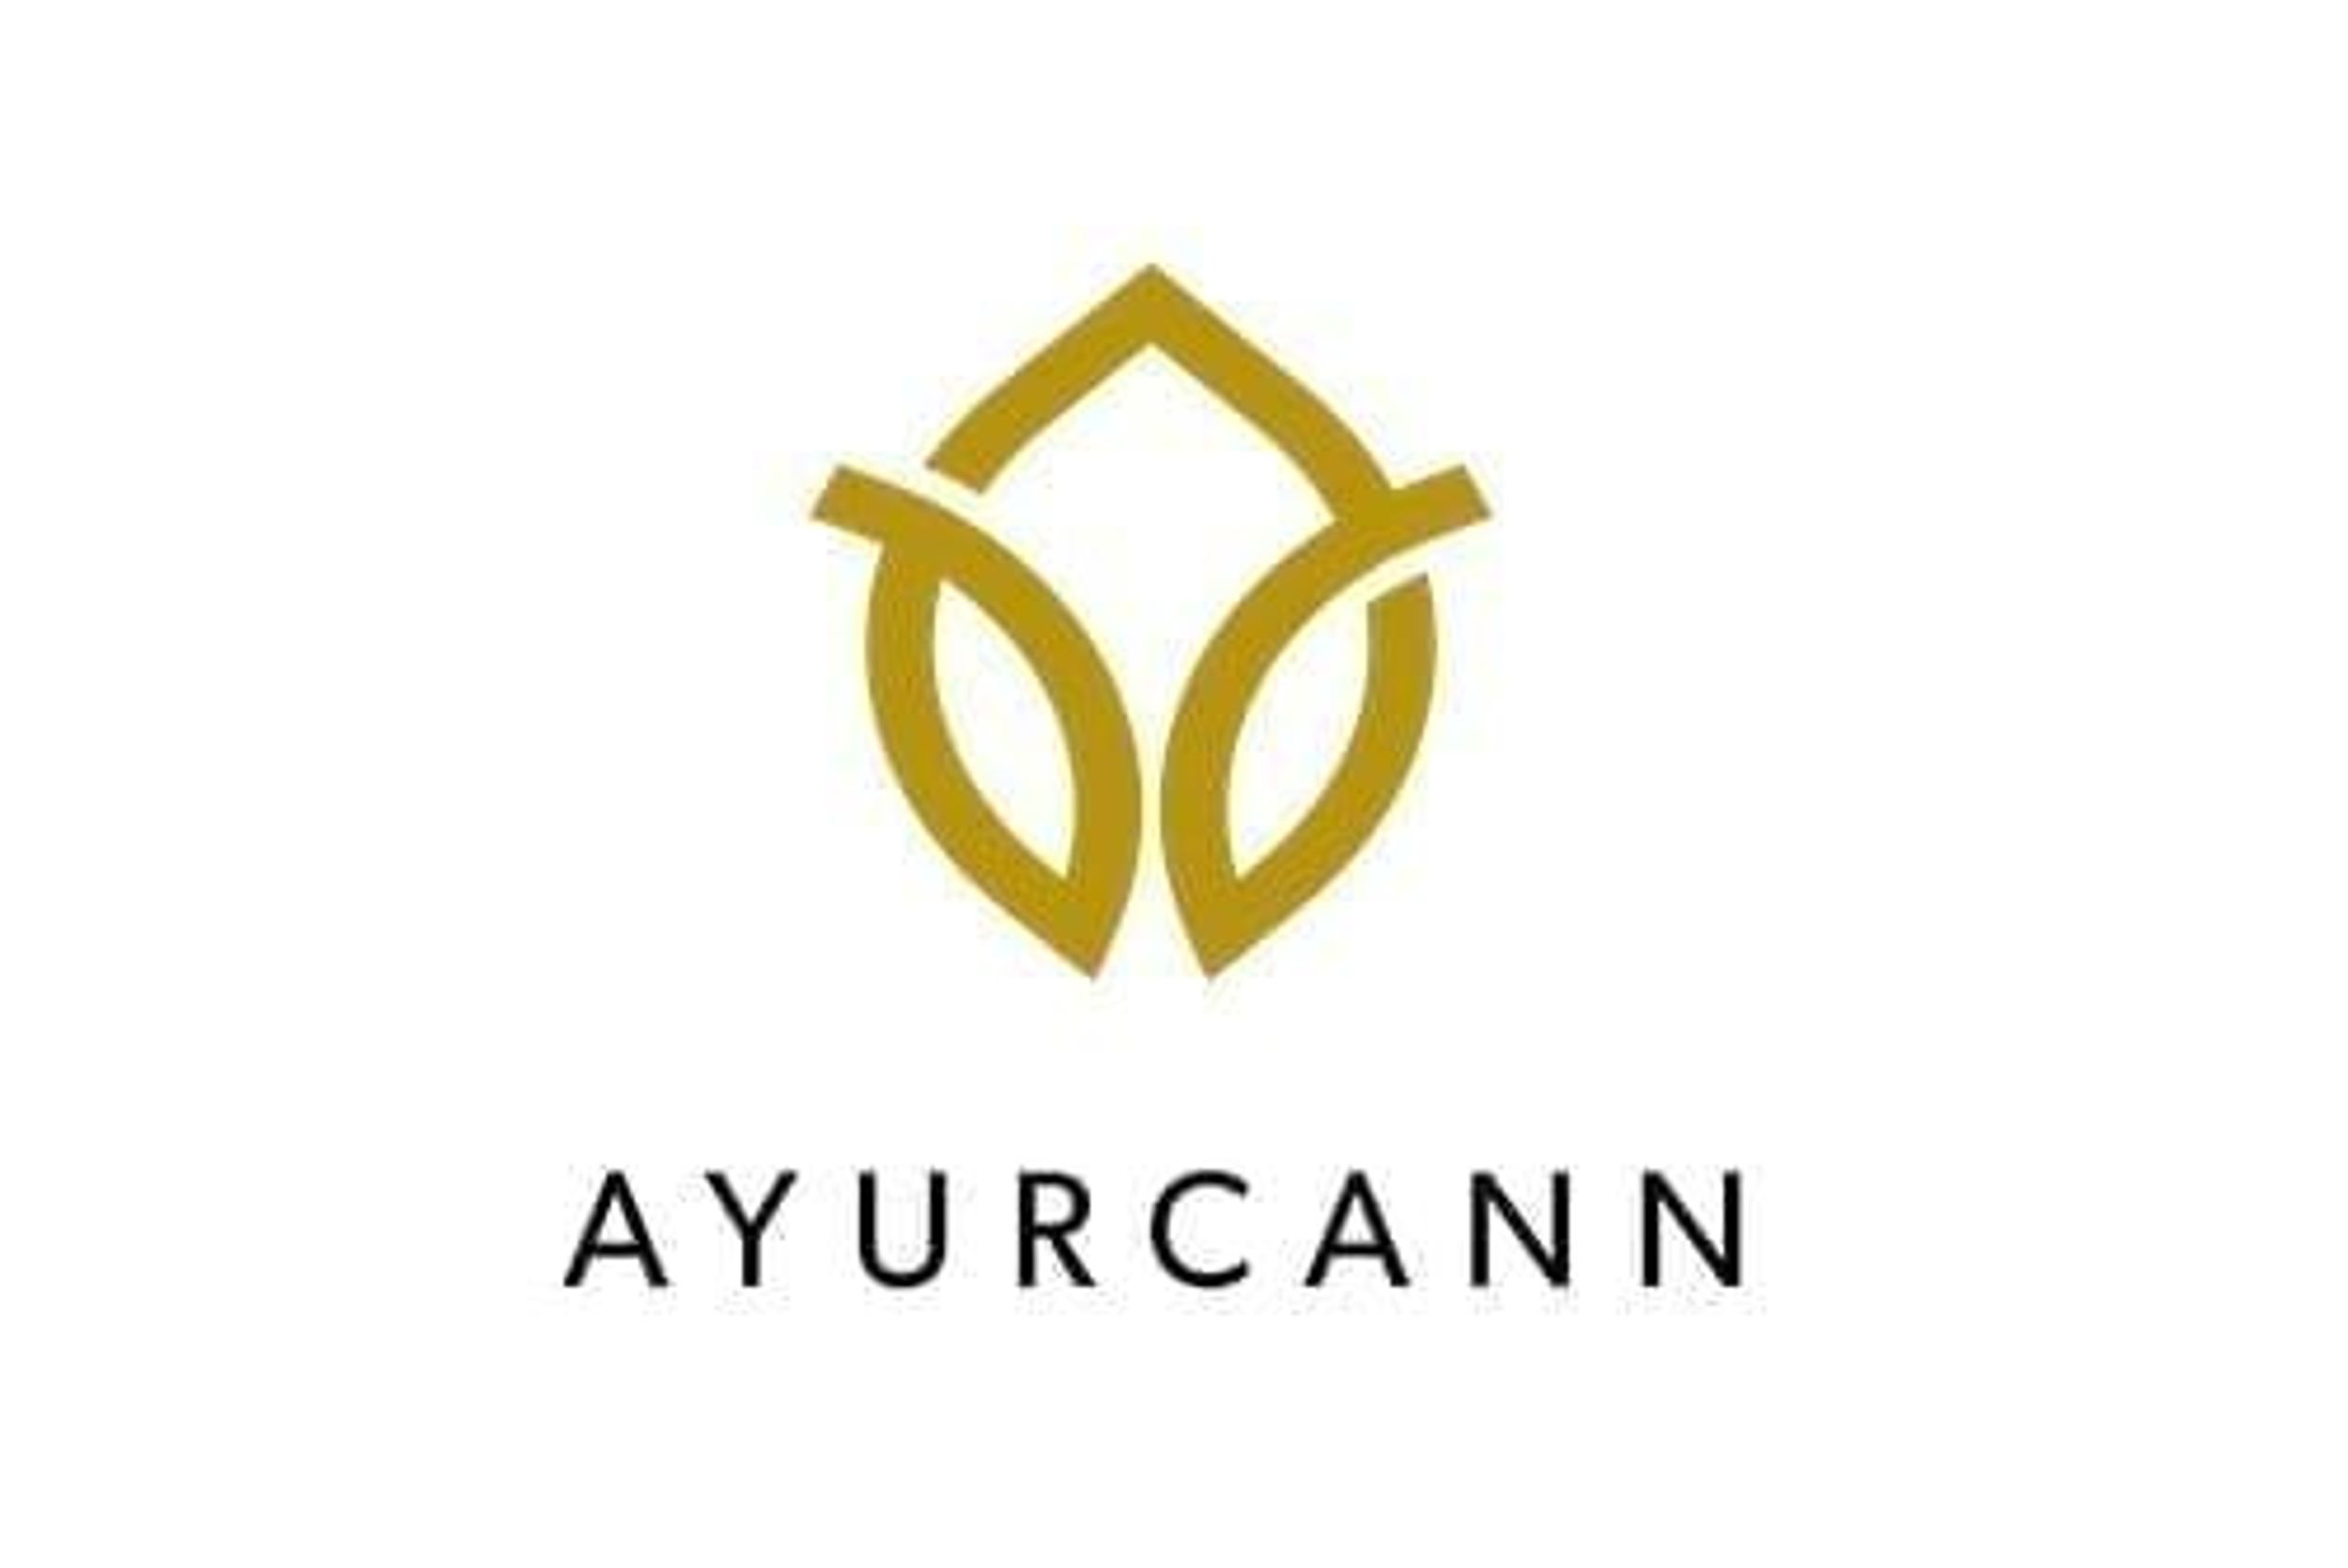 AYURCANN HOLDINGS CORP. UPDATE FOR 2022